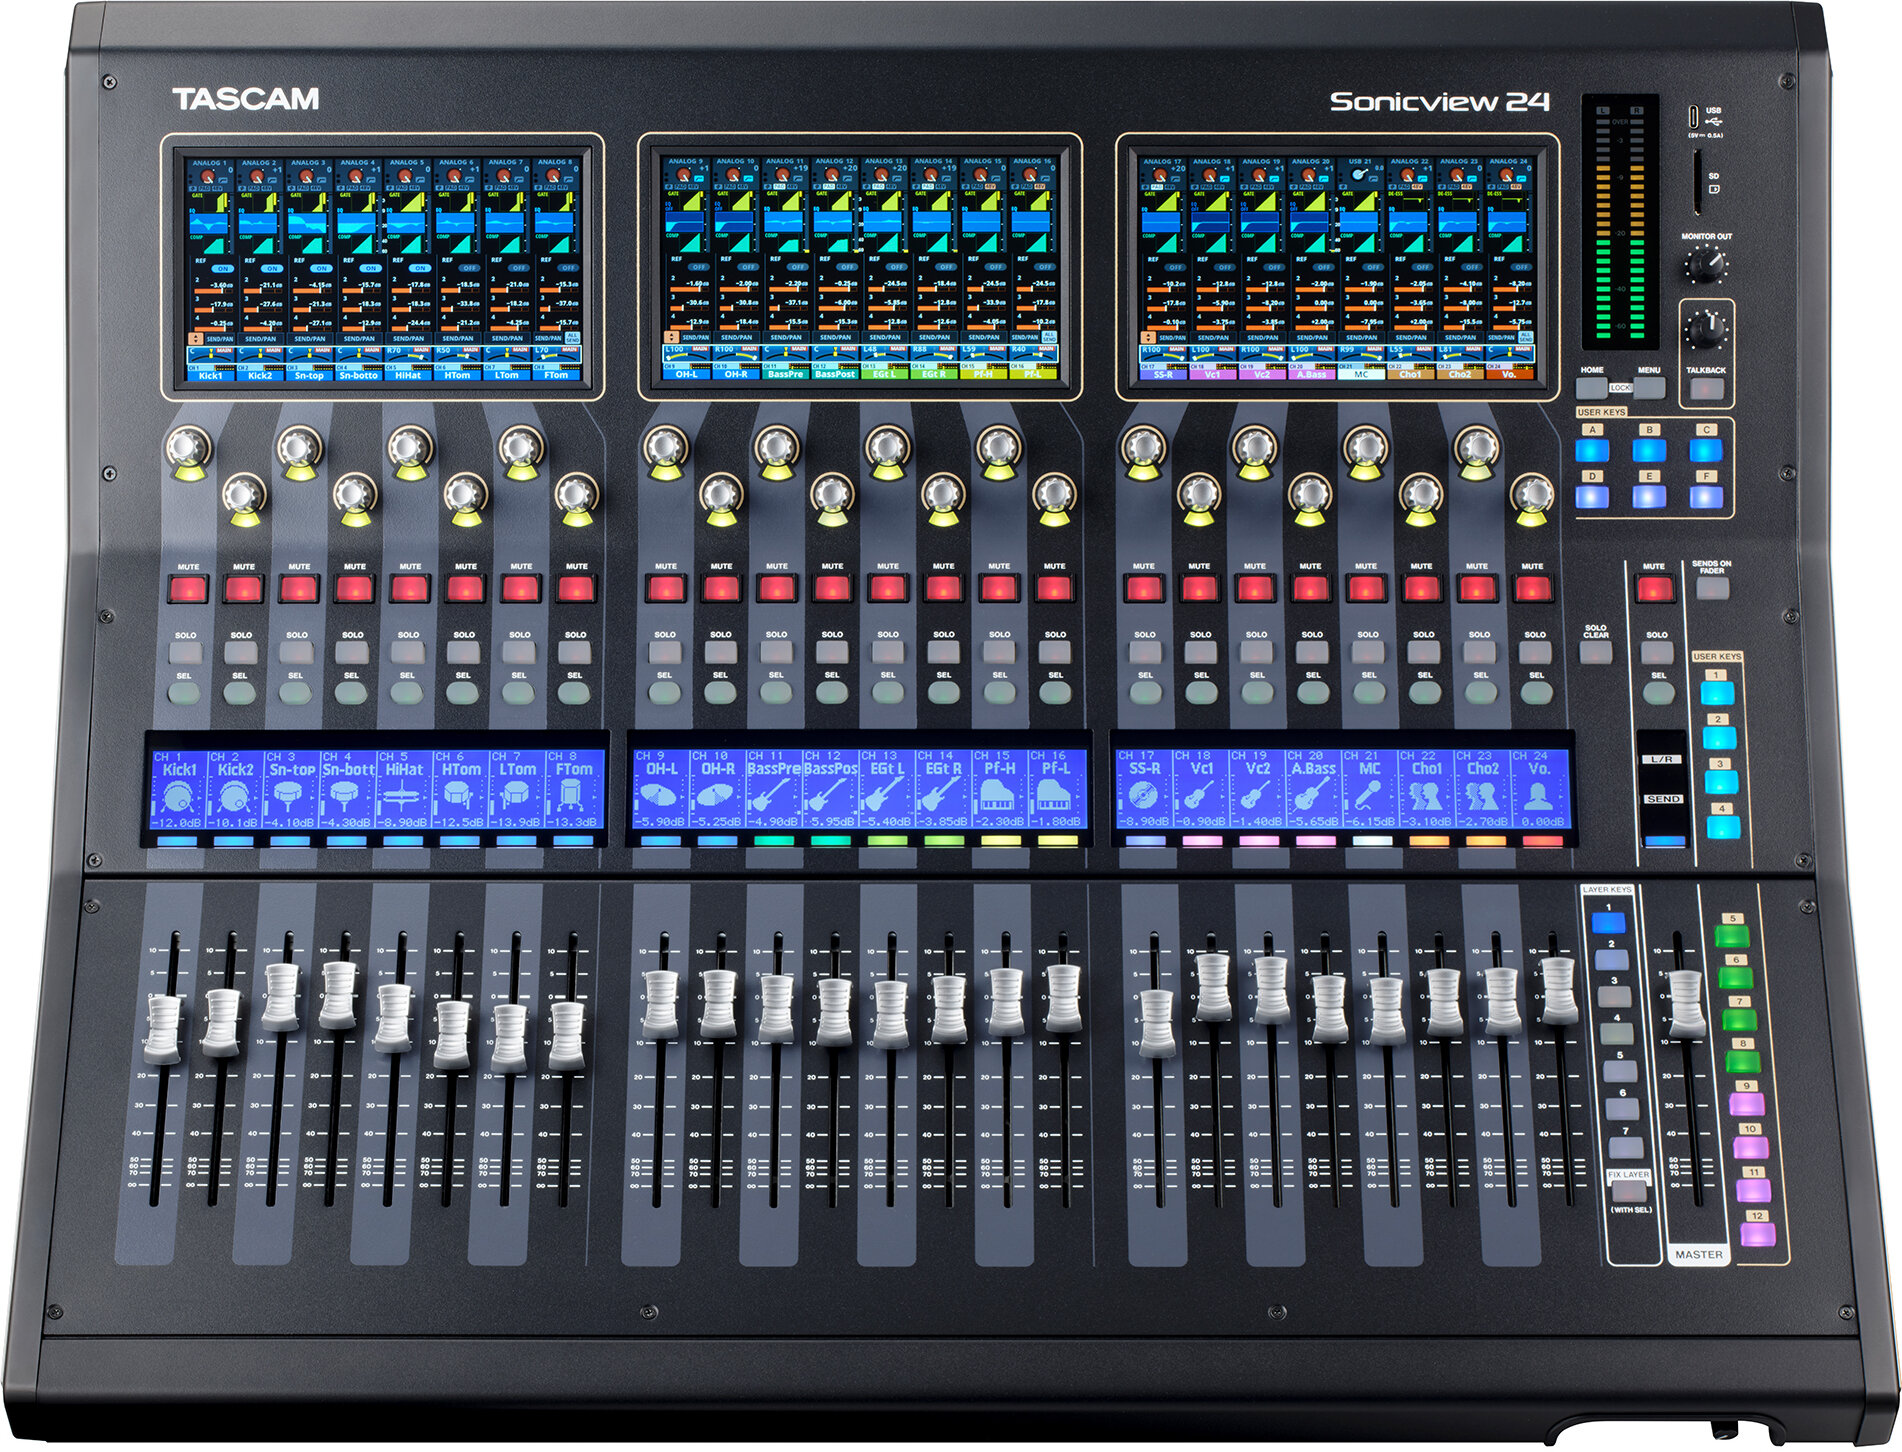 Tascam SONICVIEW 24XP 32 Channel Digital Mixer -  TAS SONICVIEW24XP